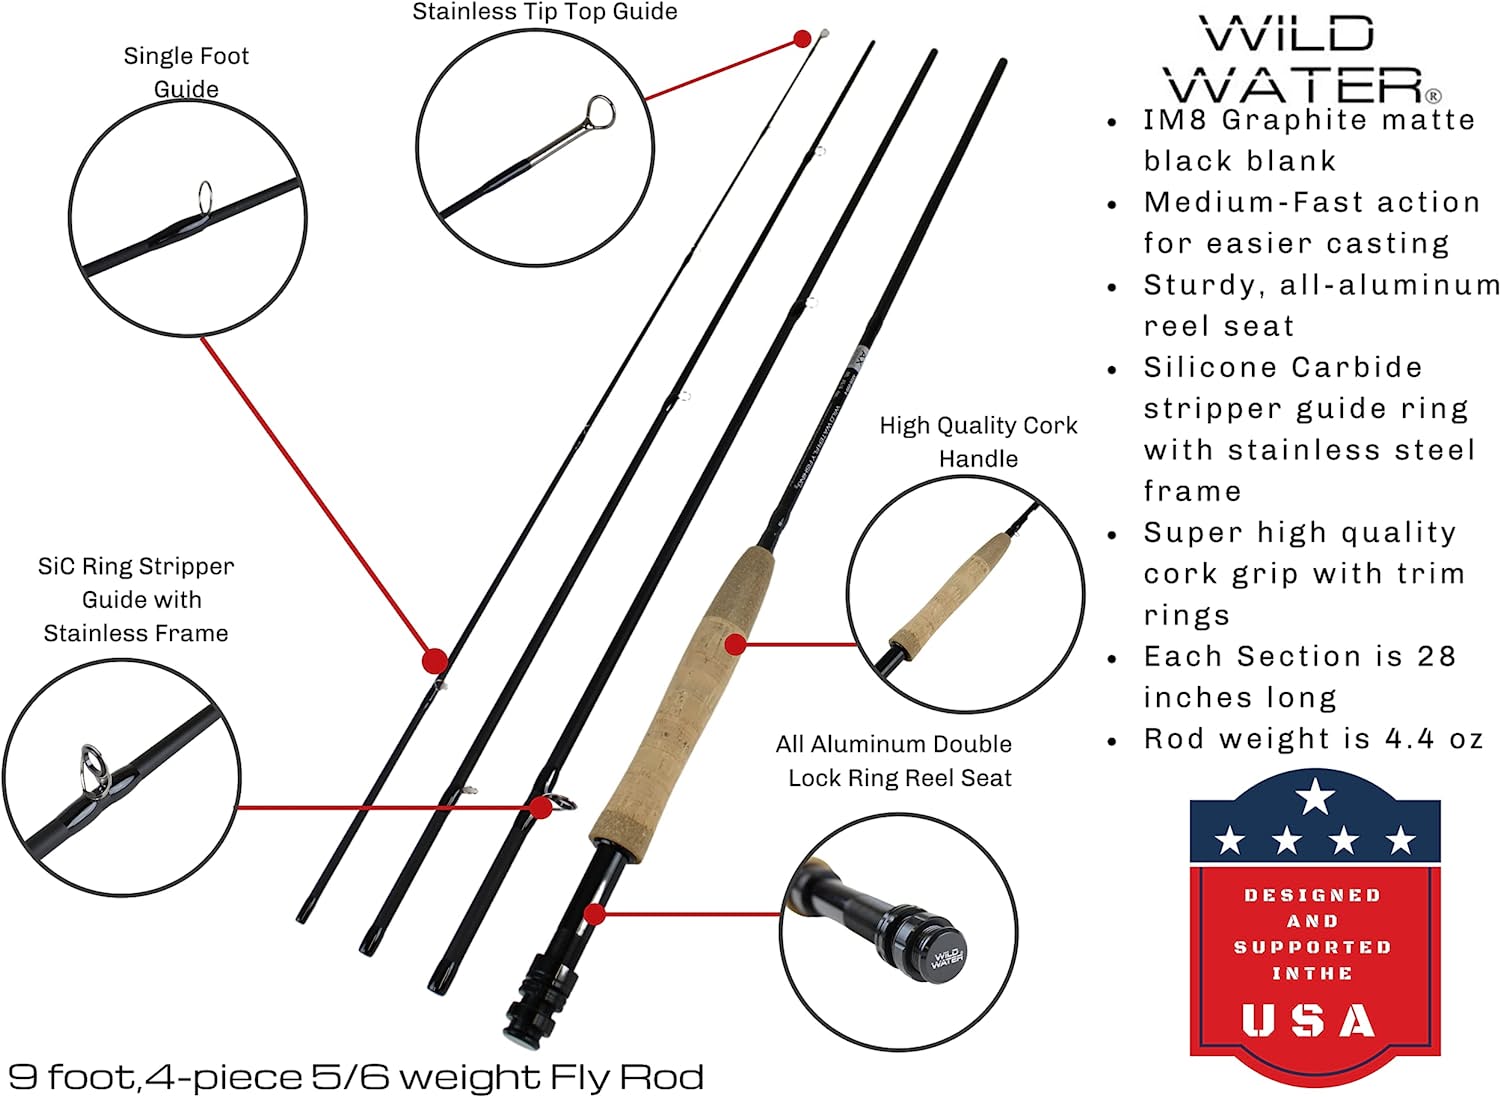 Wild Water Fly Fishing Complete 5/6 Starter Package 9′ Rod - fishingnew